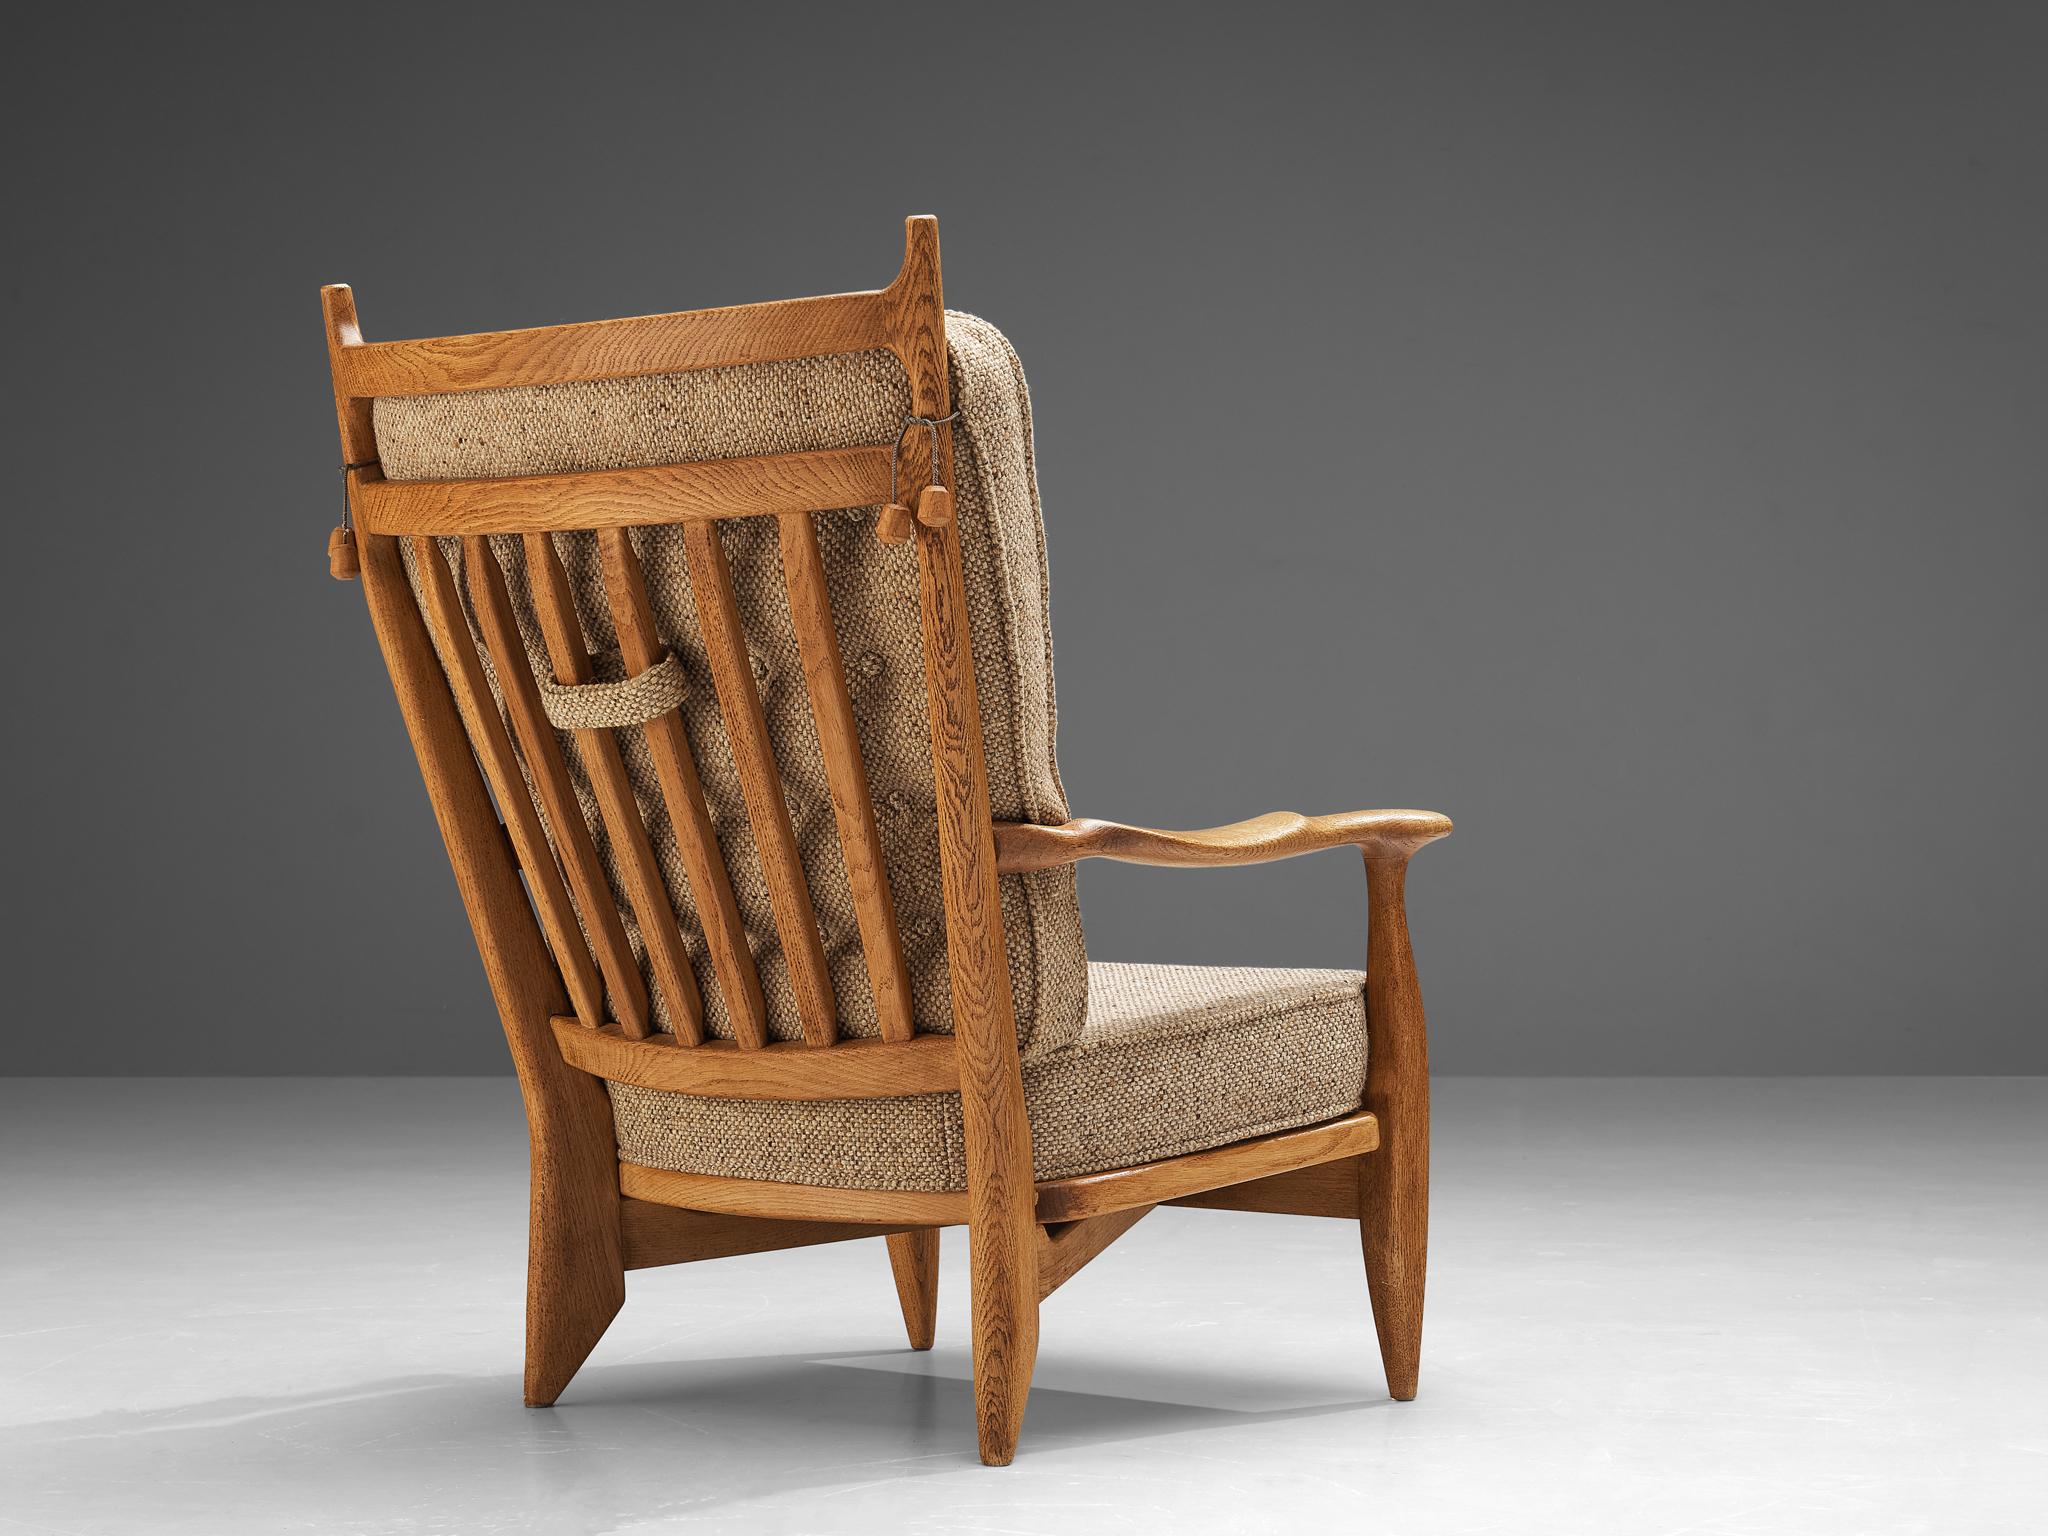 Guillerme et Chambron for Votre Maison, easy chair, oak, fabric, France, 1960s

Guillerme and Chambron are known for their high quality solid oak furniture, of which this two armchair is another great example. This lounge chair has an interesting,